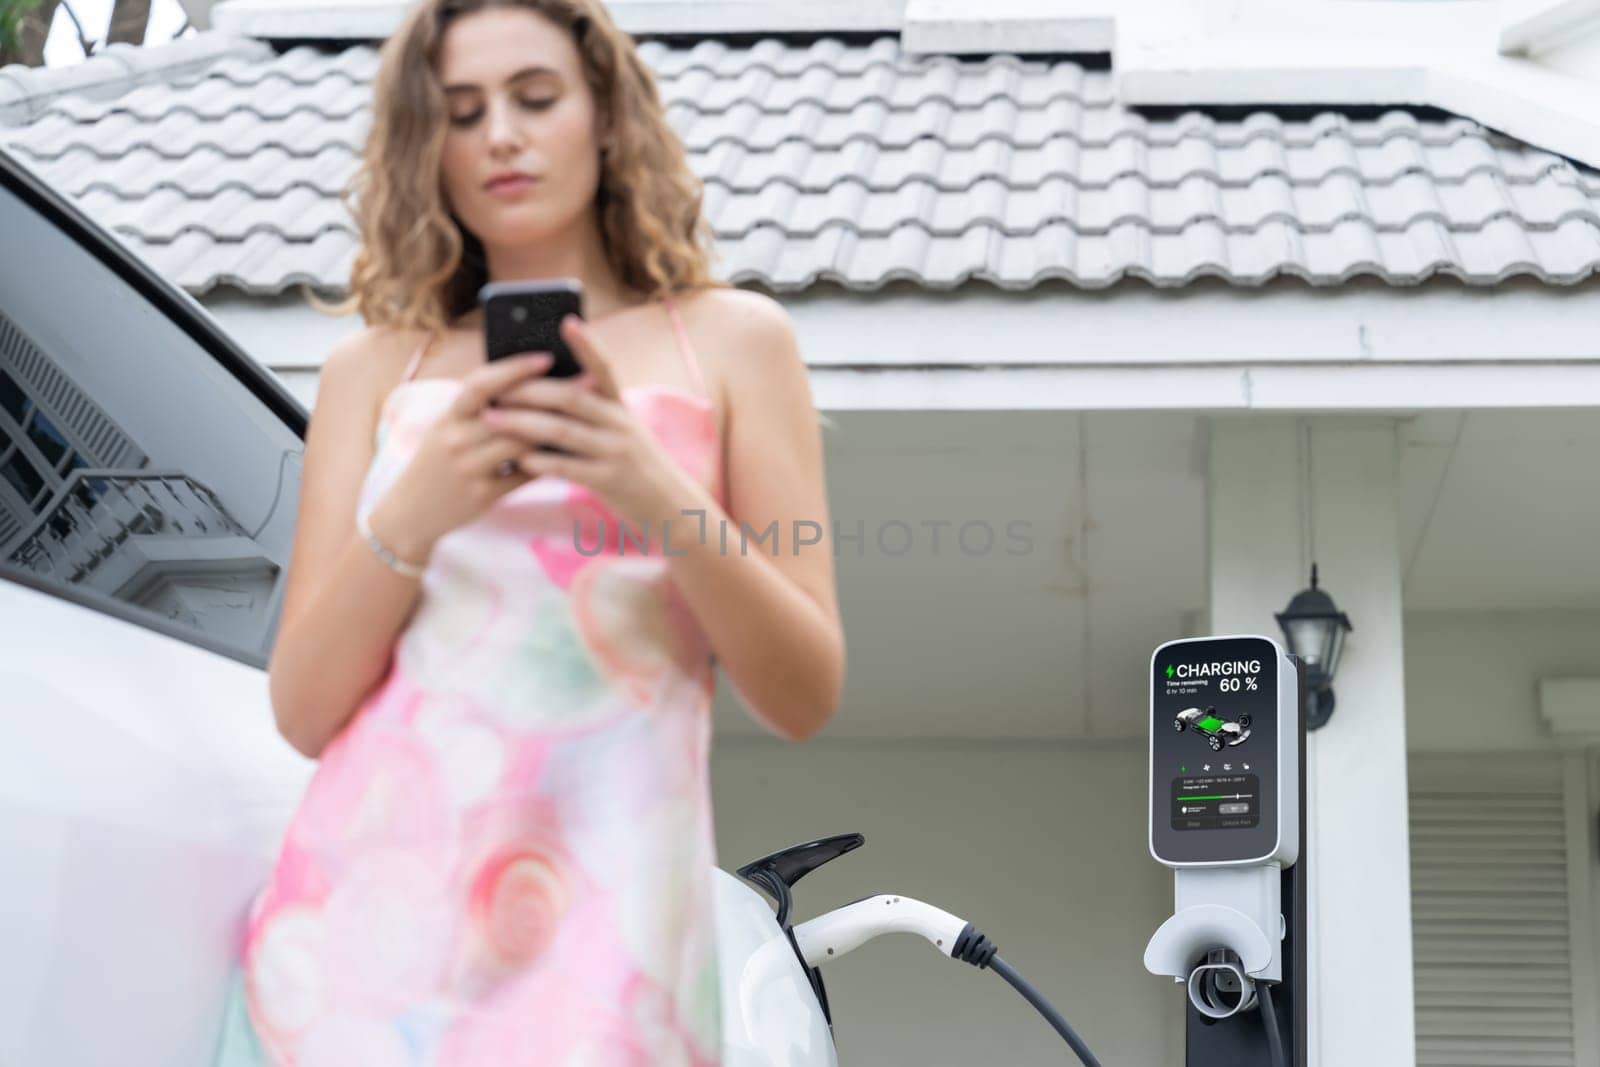 Focused home EV charging station on blurred background of modern eco-friendly woman using smartphone. EV technology utilization for residential home concept. Synchronos